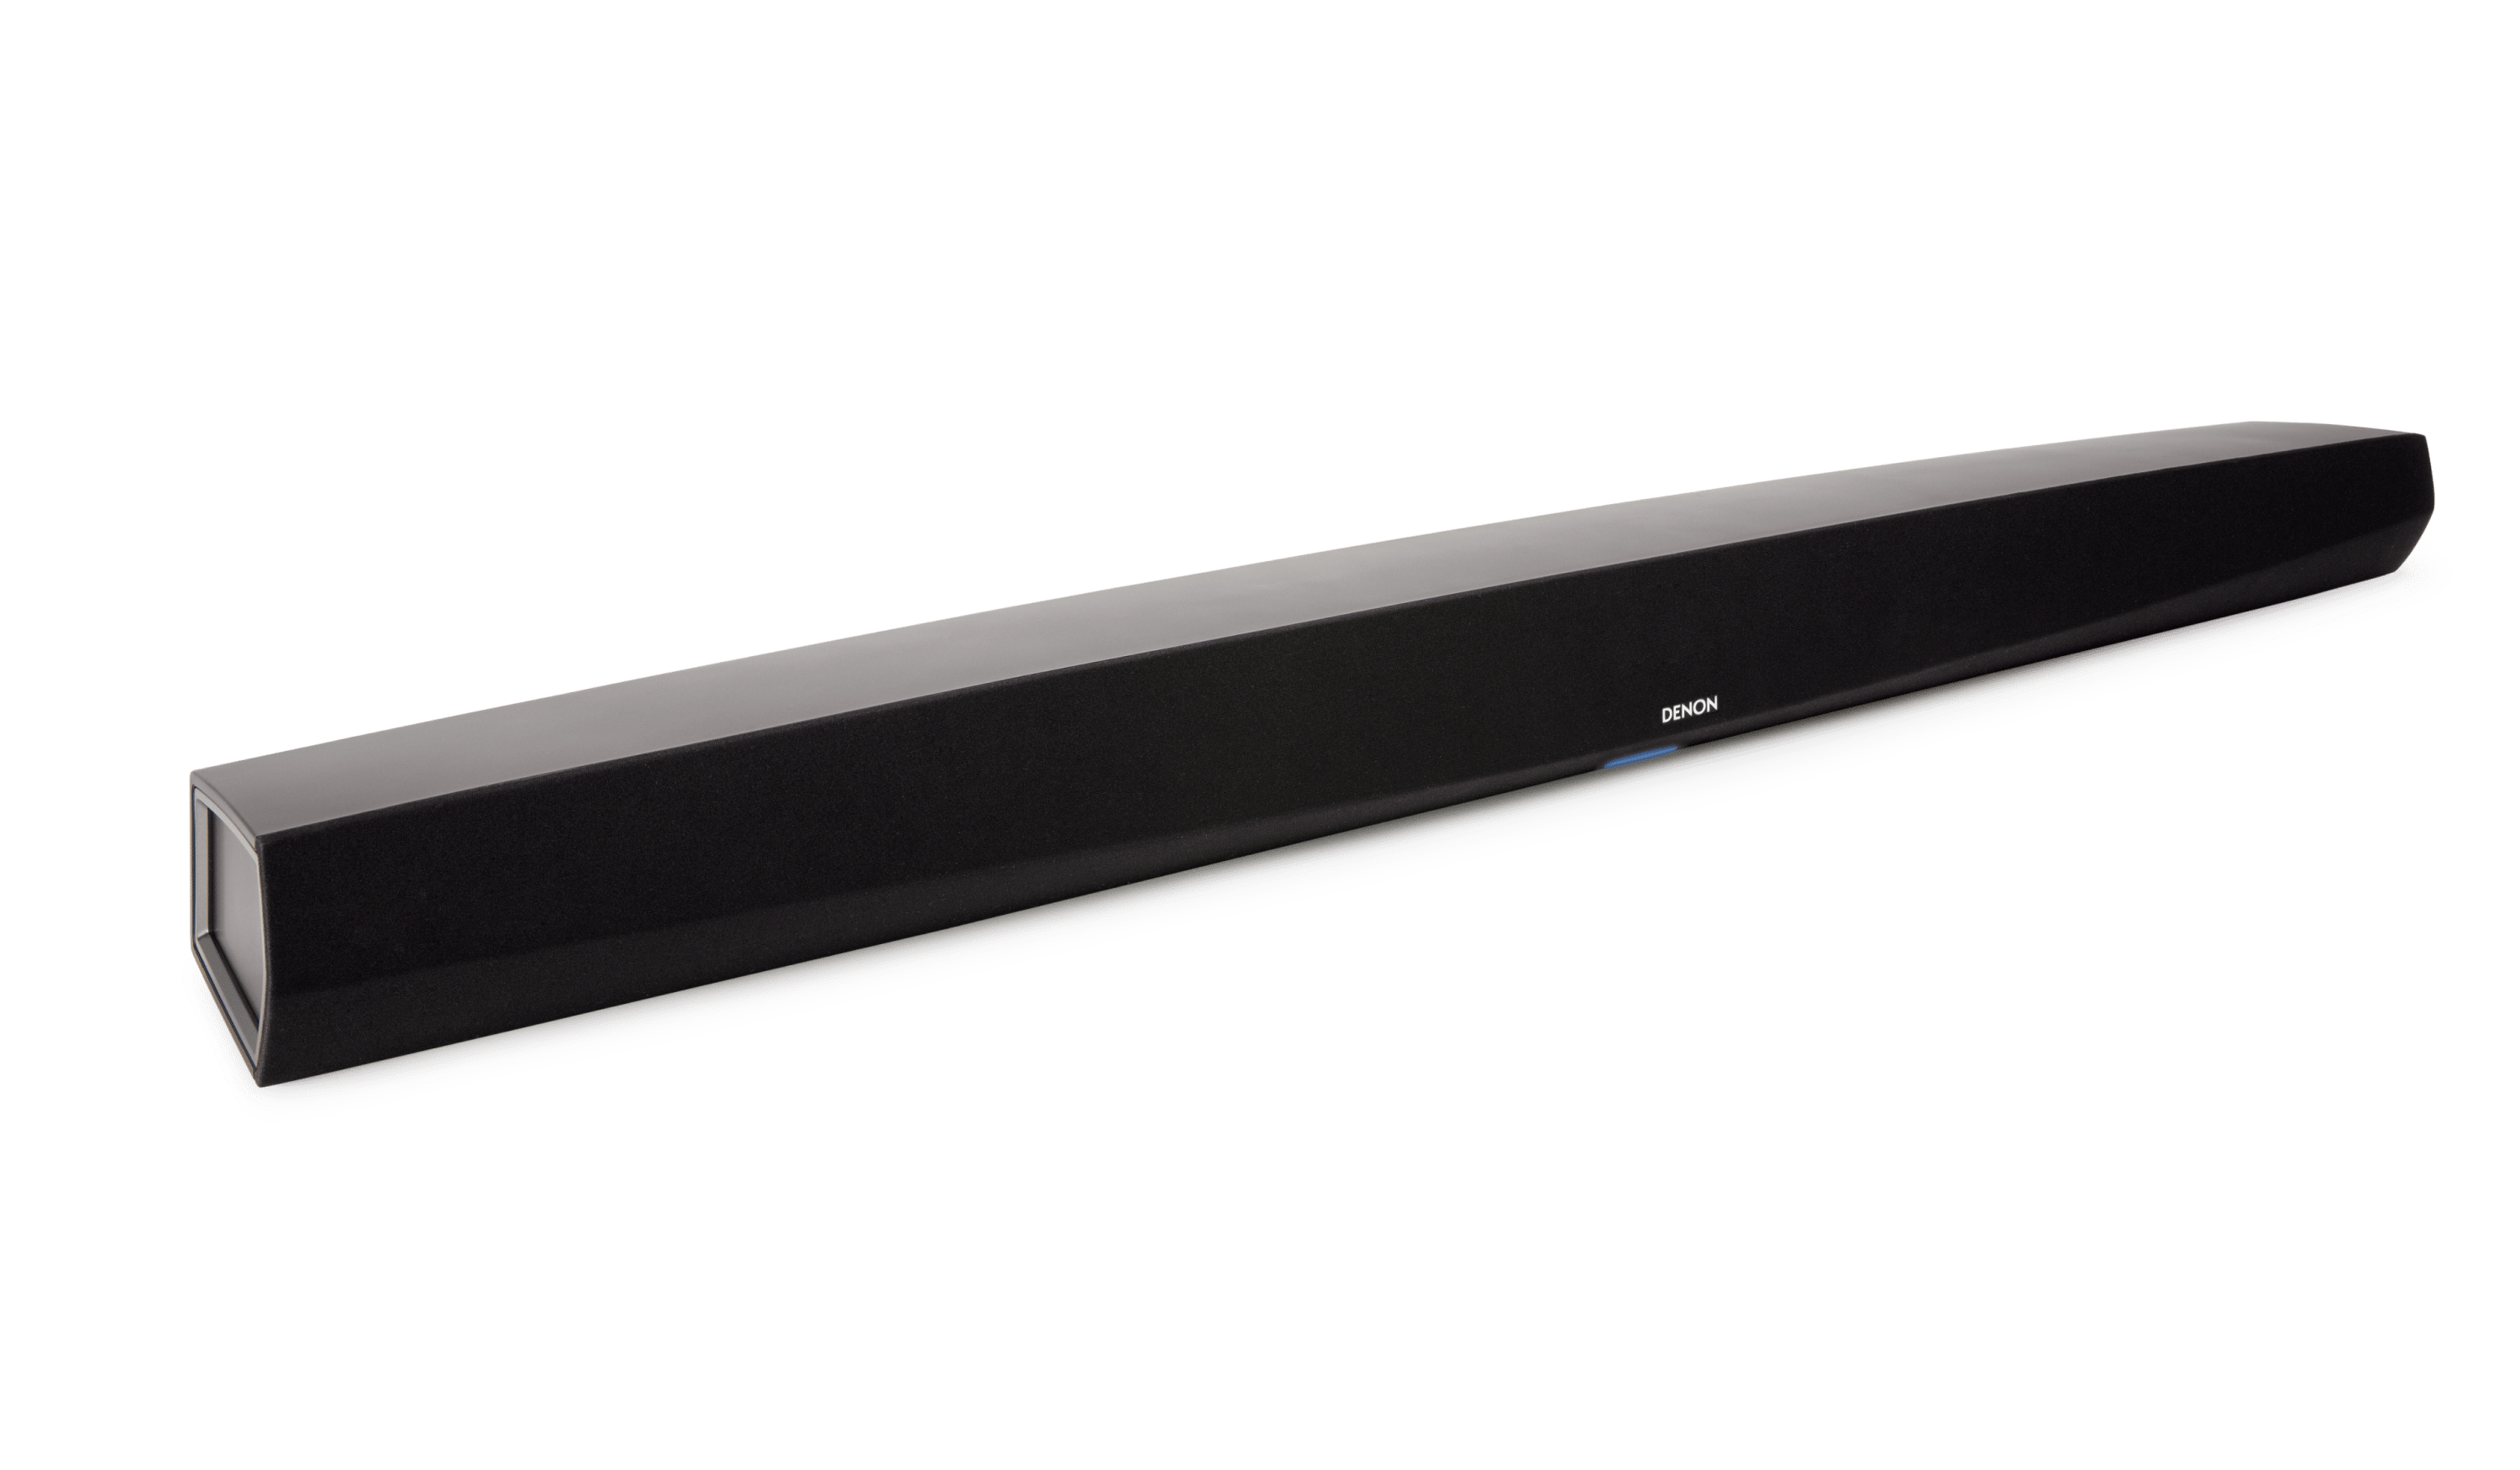 DHT-S516H - Large Sound Bar with wireless Subwoofer and HEOS 